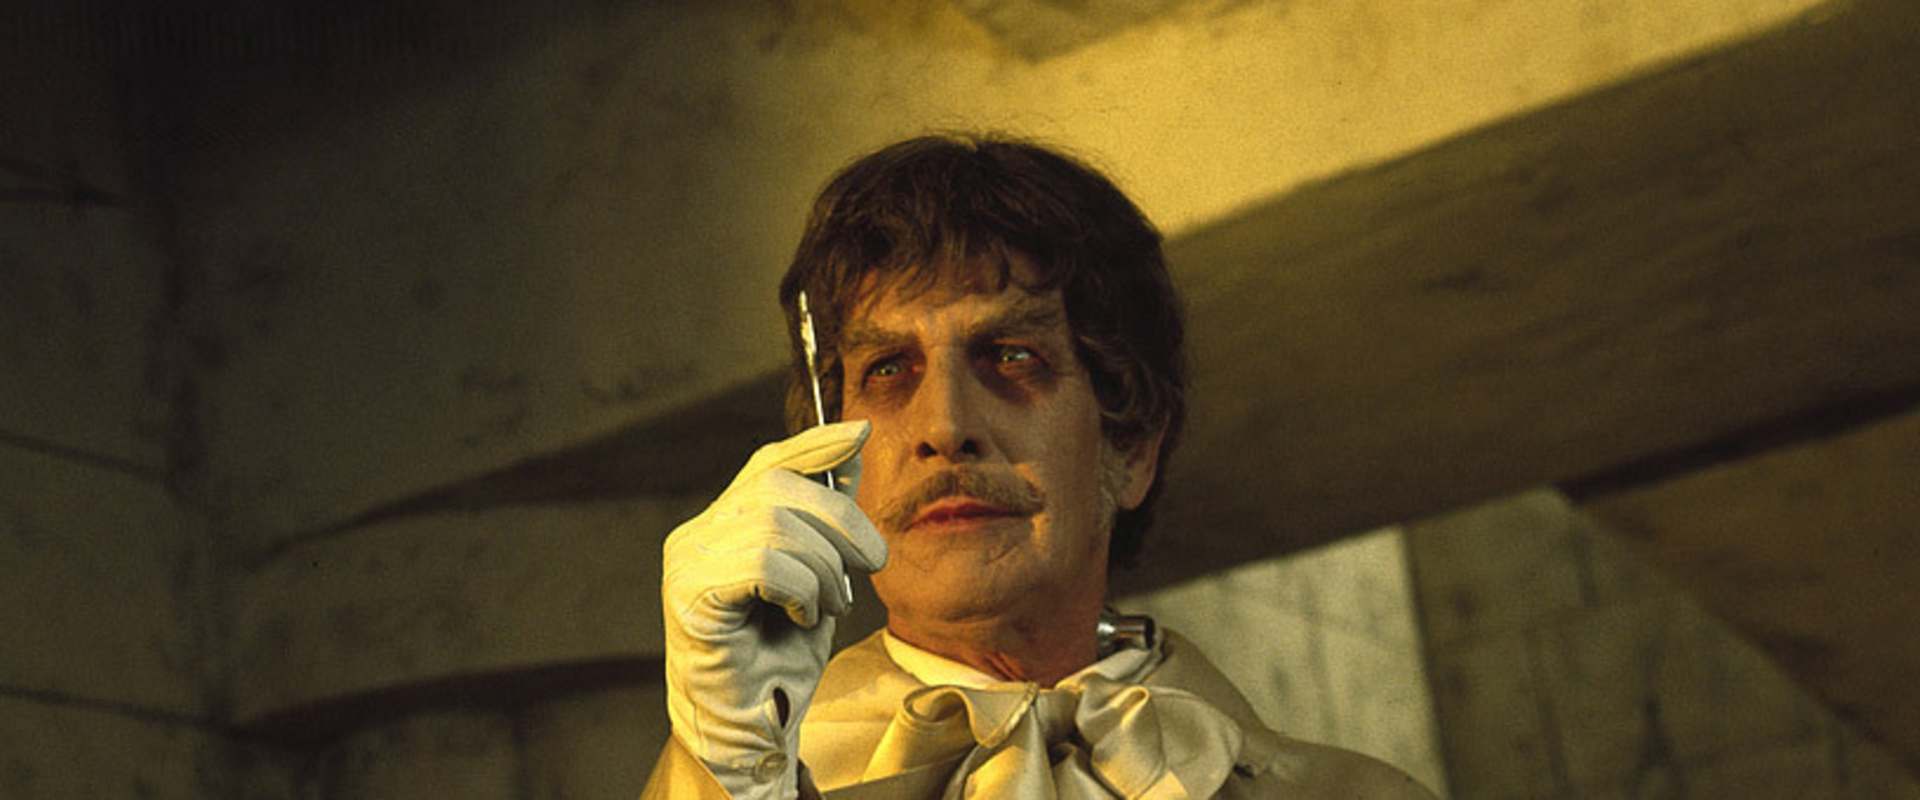 Dr. Phibes Rises Again background 2